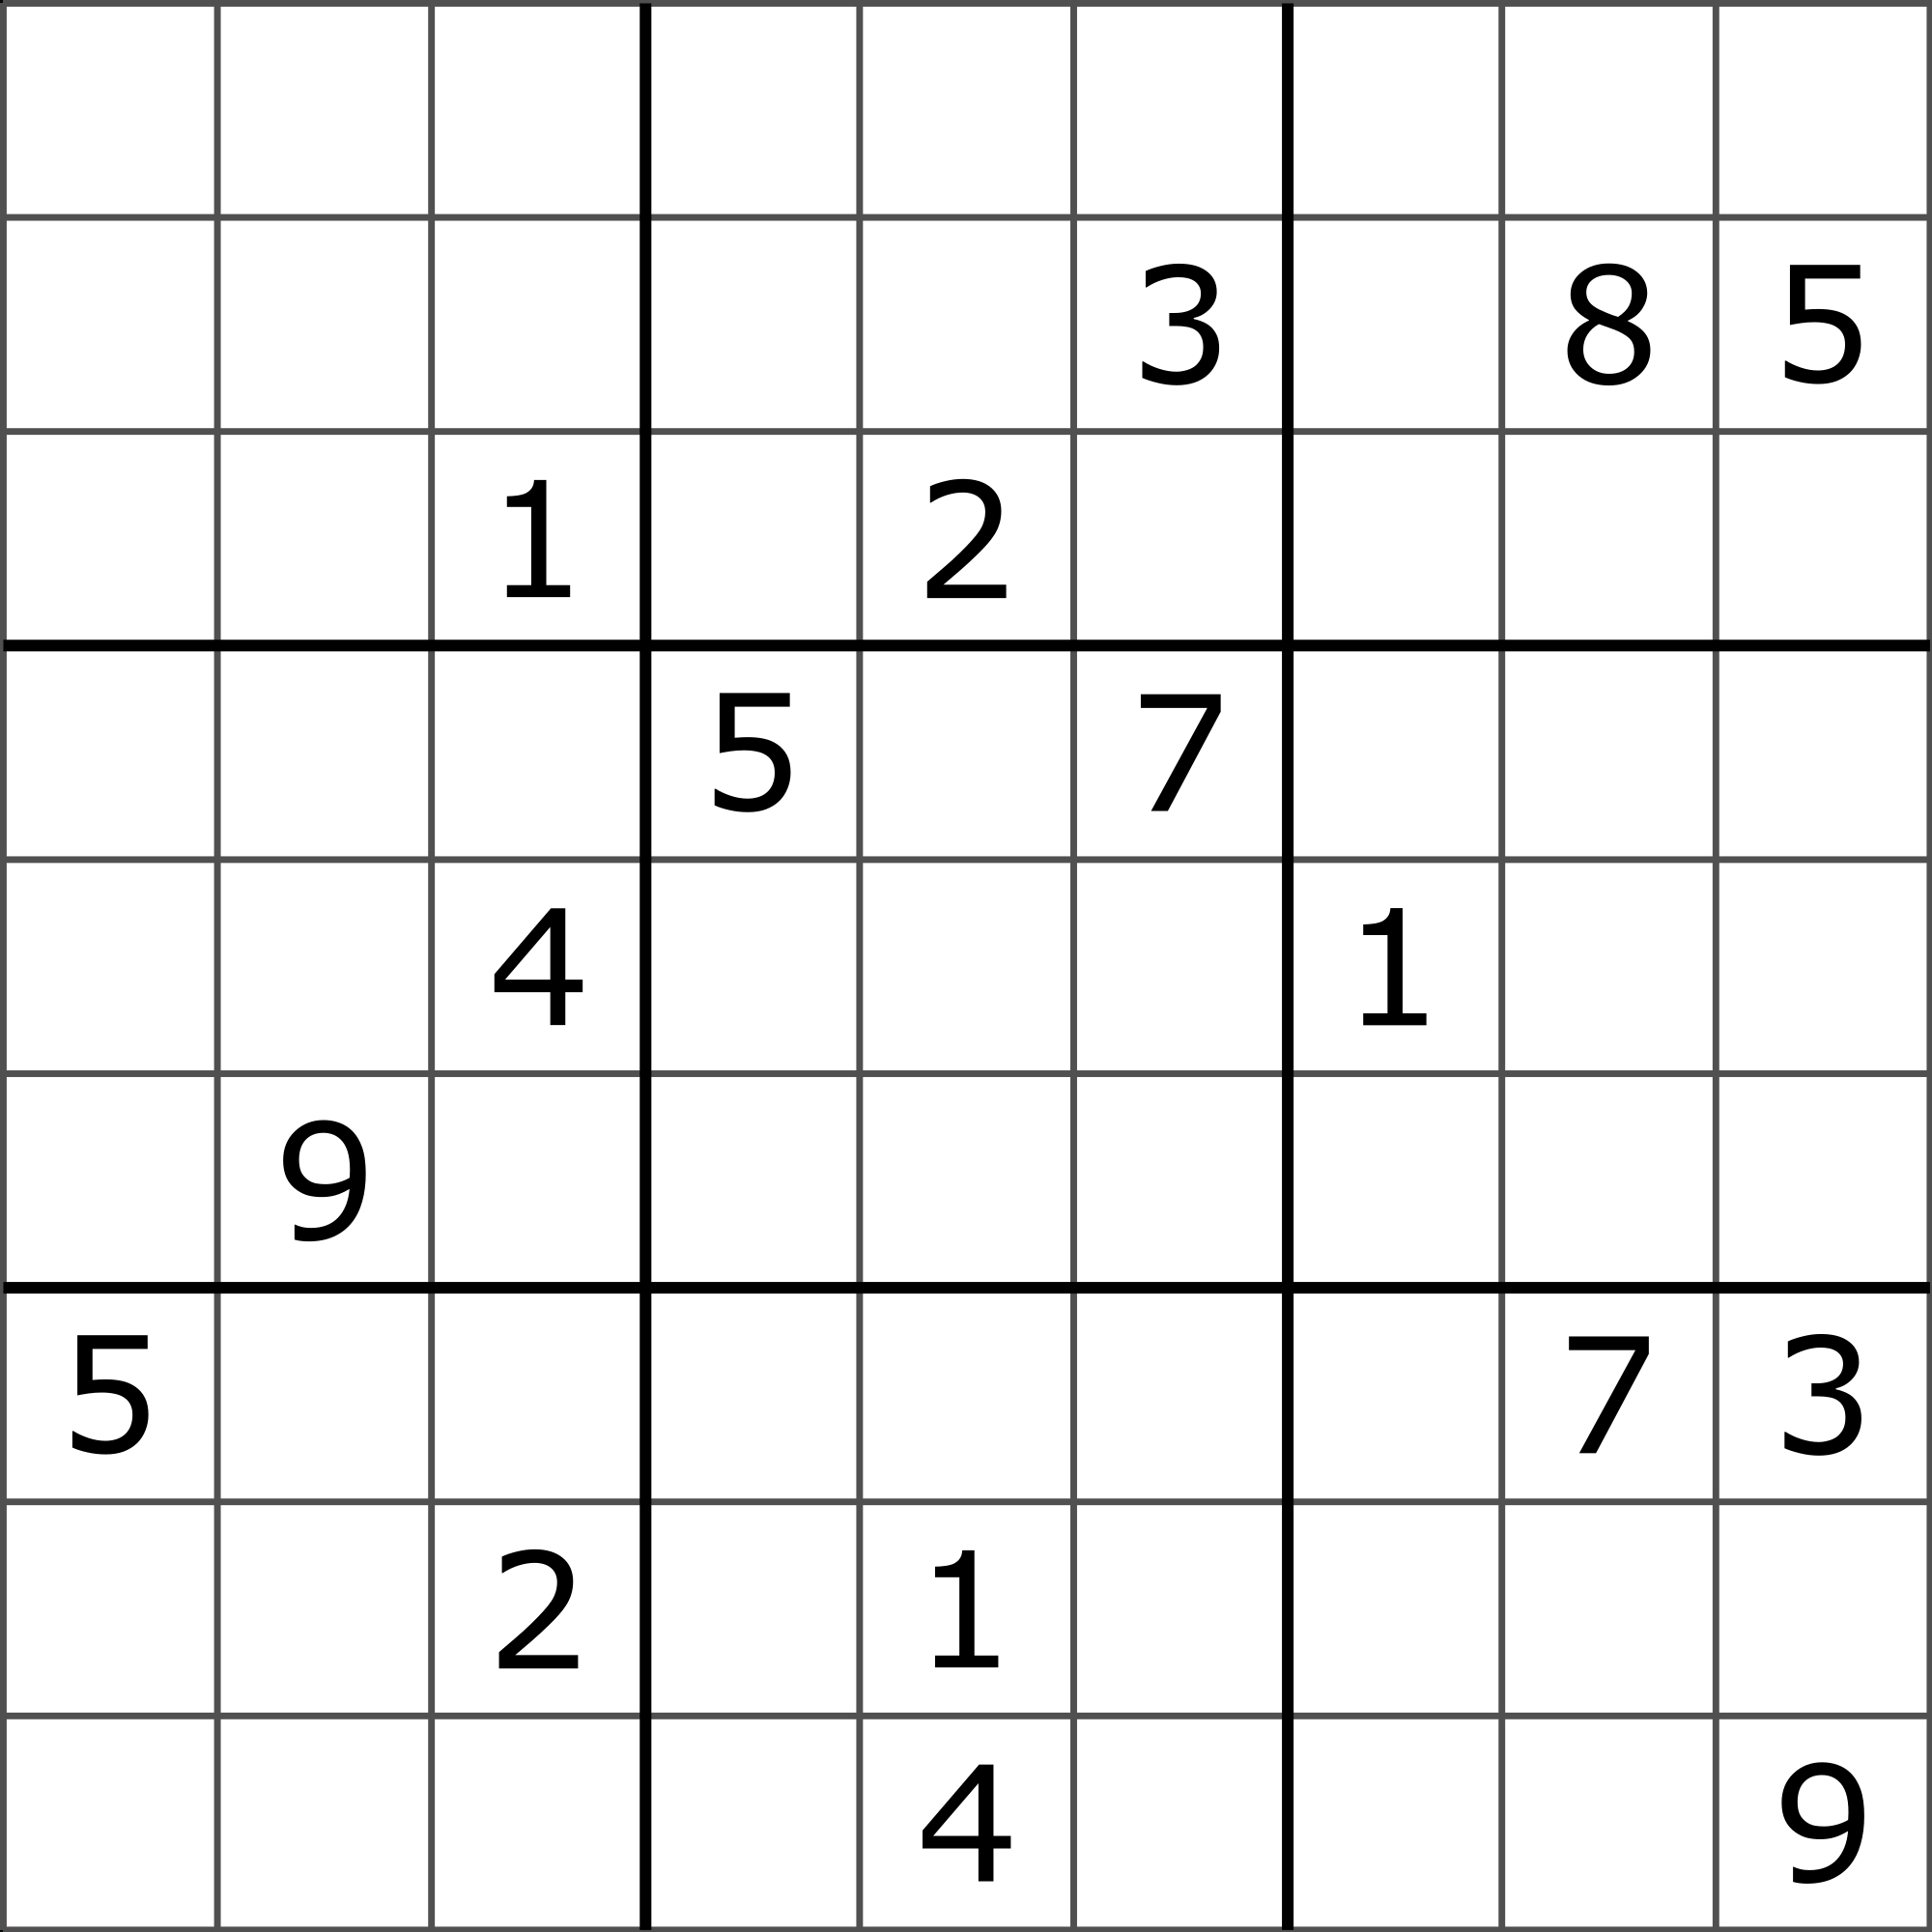 Solving Sudoku Using A Simple Search Algorithm - George Seif